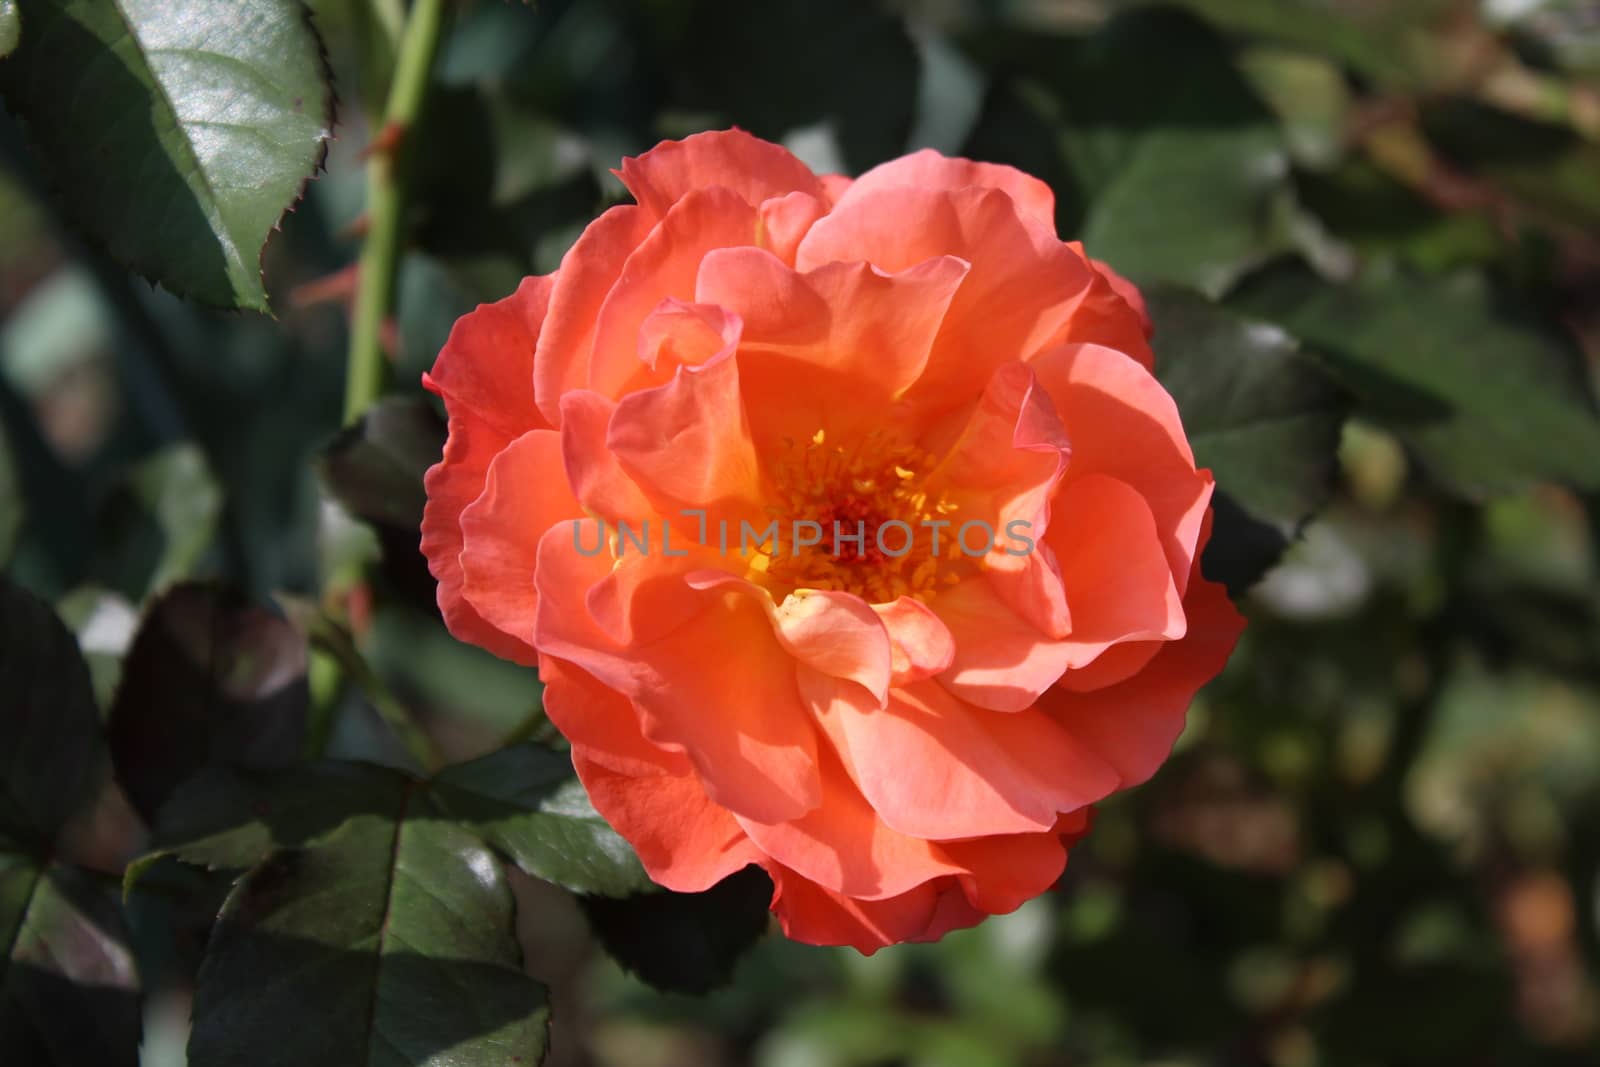 The picture shows a red rose in the garden.